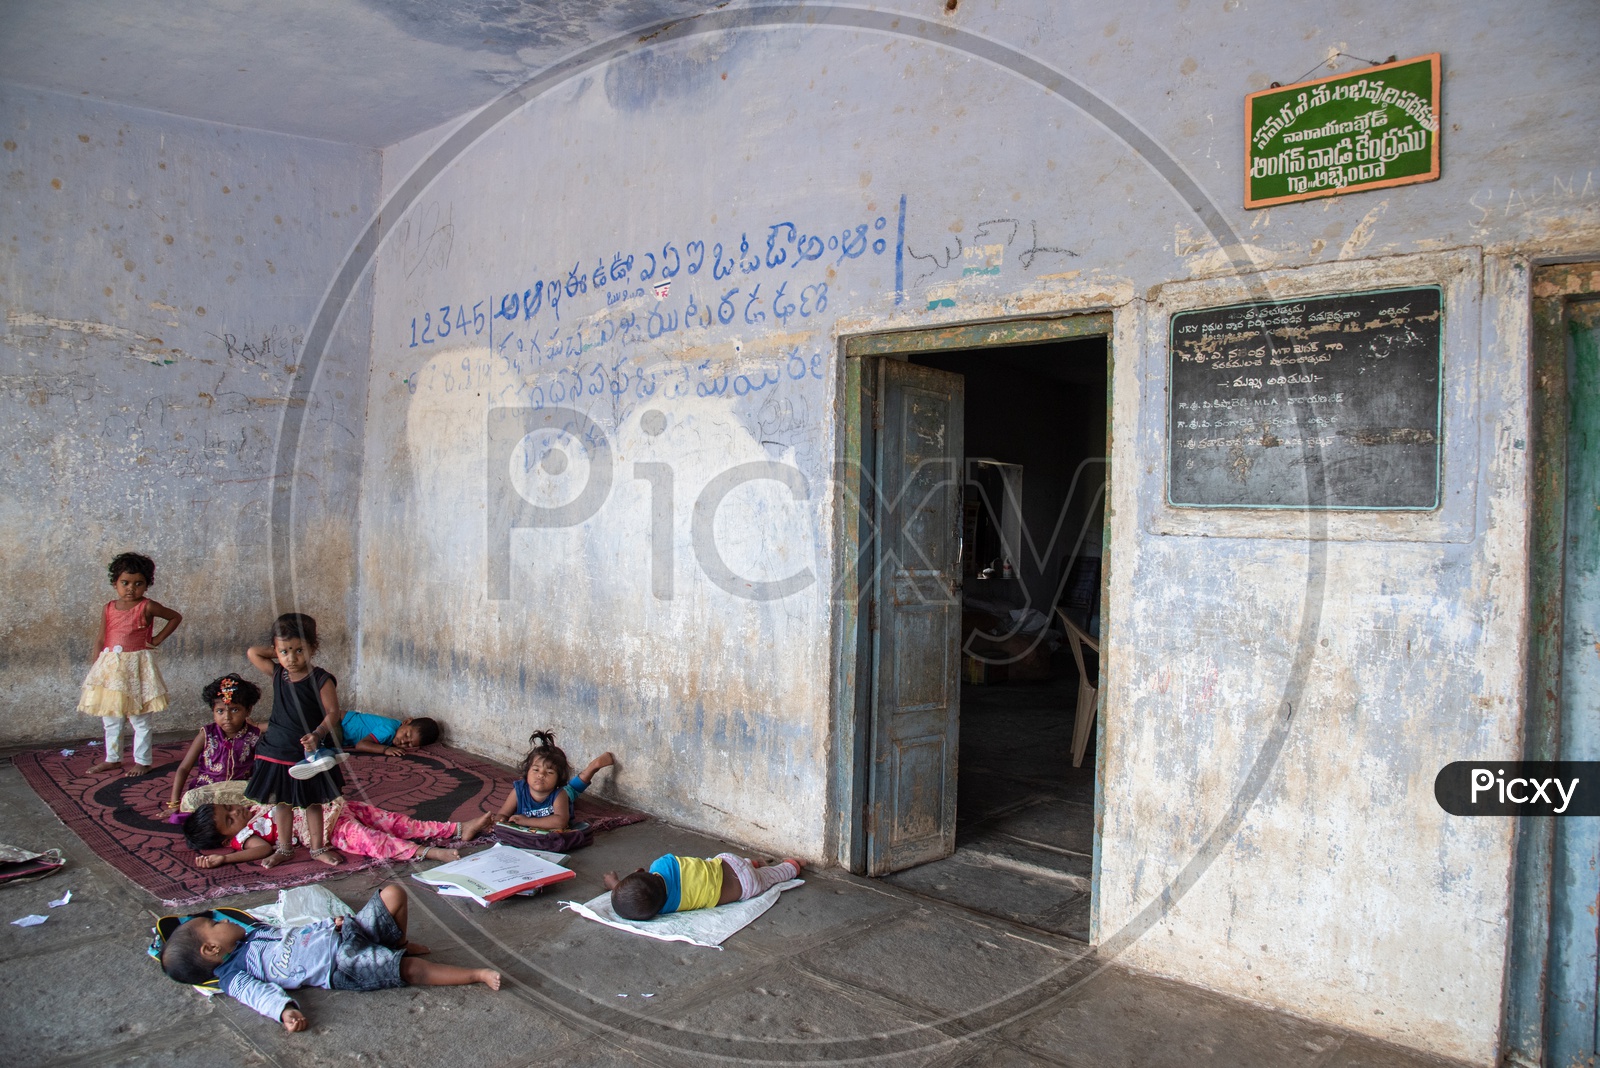 students/kids/children in an Anganwadi School,Abbenda during their Nap time